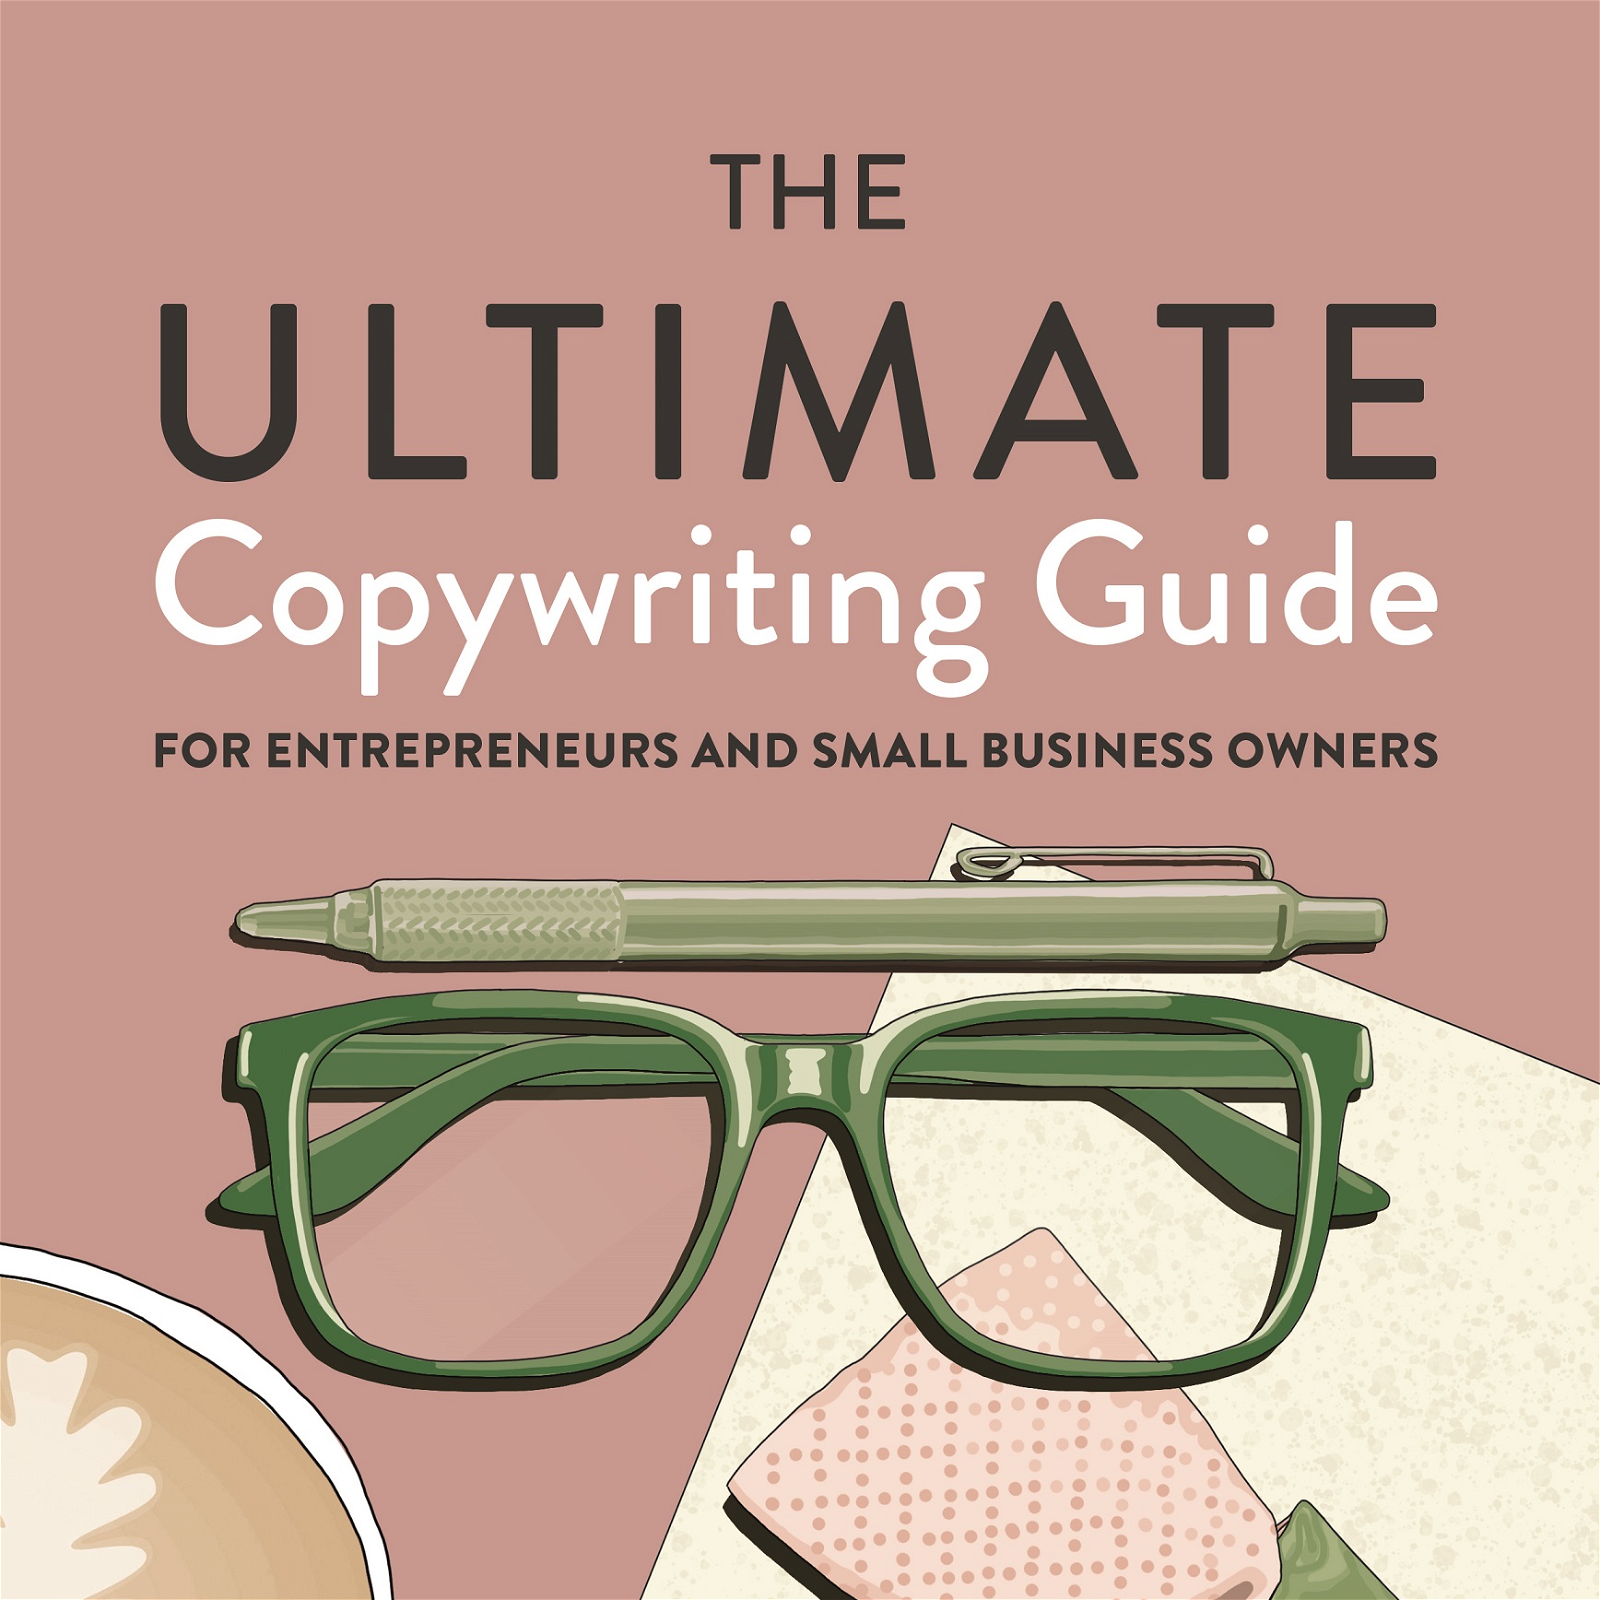 The Ultimate Copywriting Guide for Entrepreneurs and Small Biz Owners